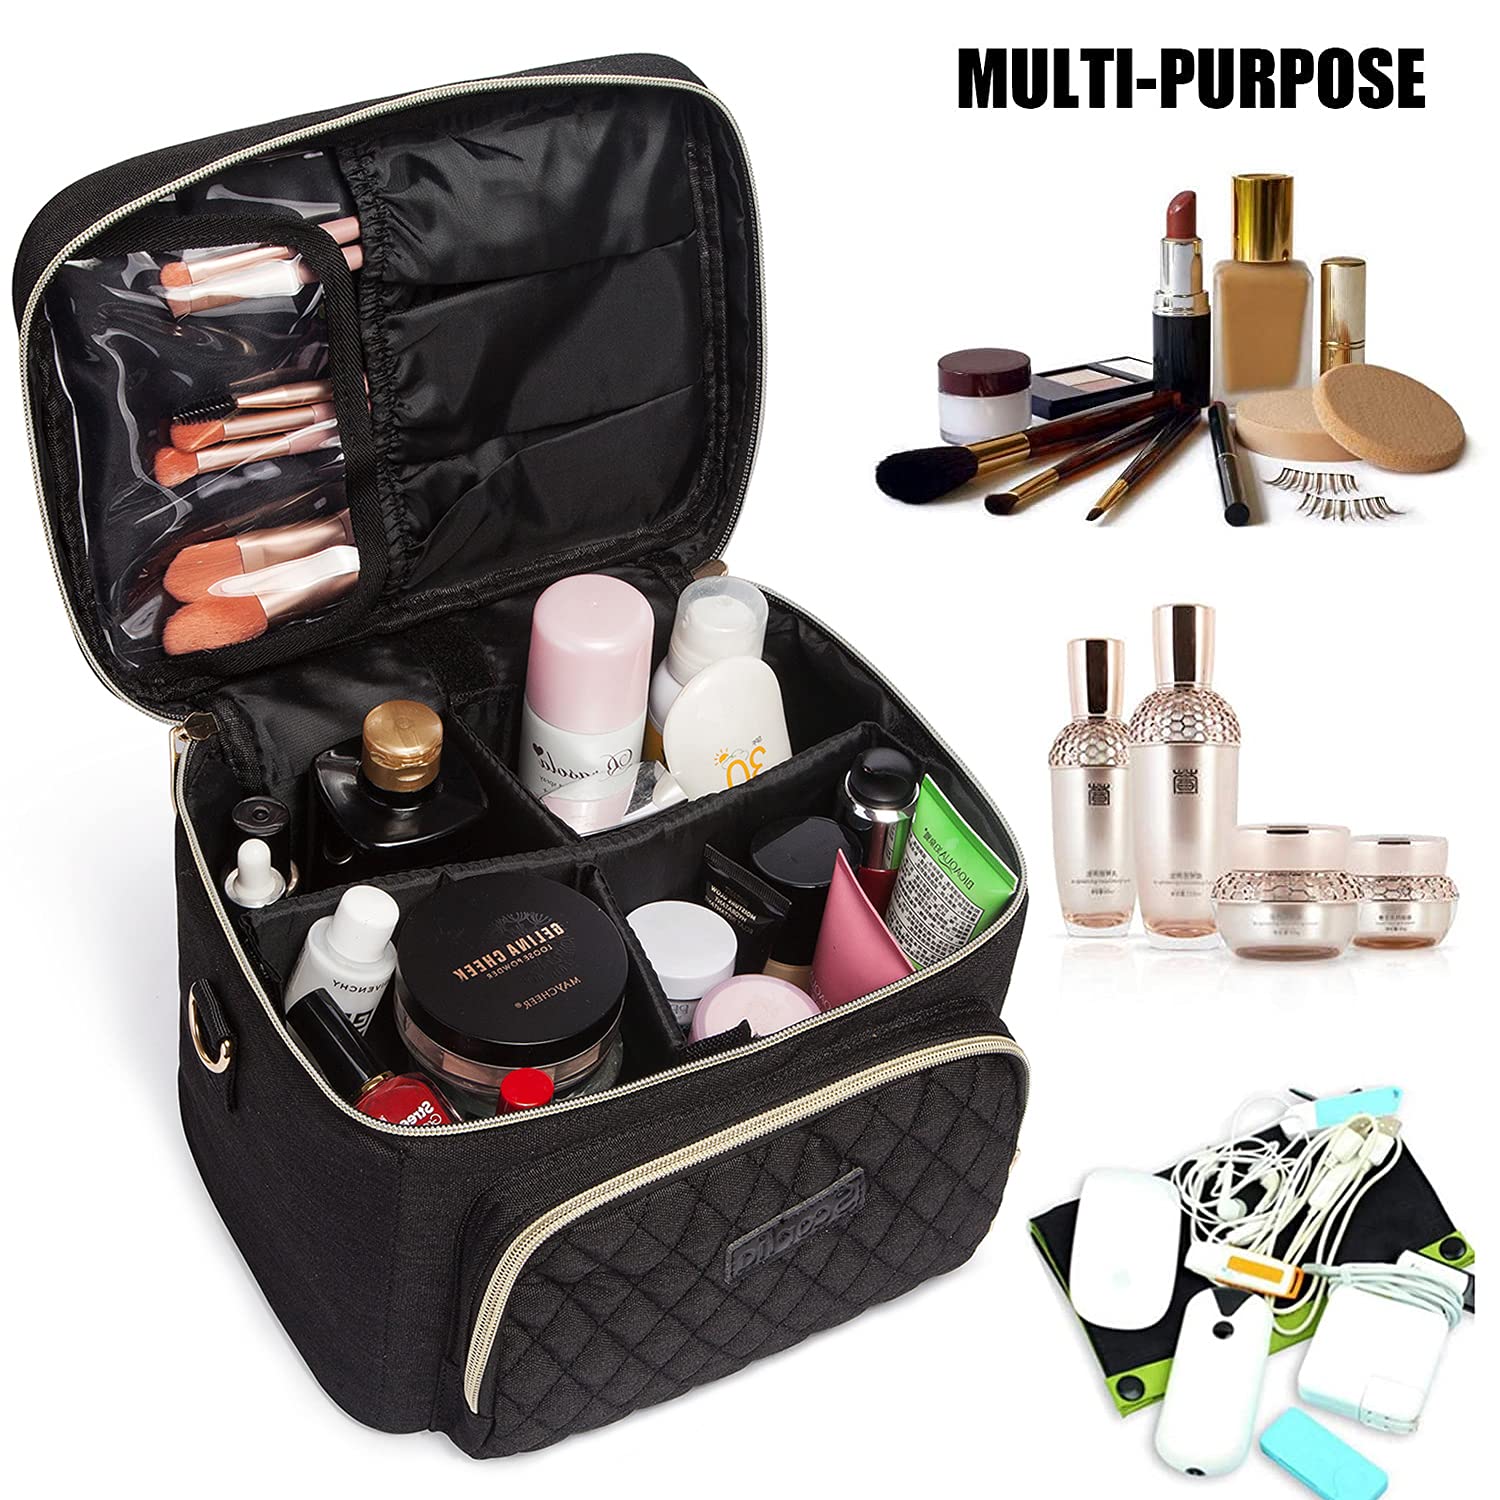 Travel Makeup Bag for Women, Scorila Large Cosmetic Case Organizer Fits Bottles Vertically, Toiletry Bag with Adjustable Dividers and Brush Holder, Portable Storage Bag with Strap for Girls, Black